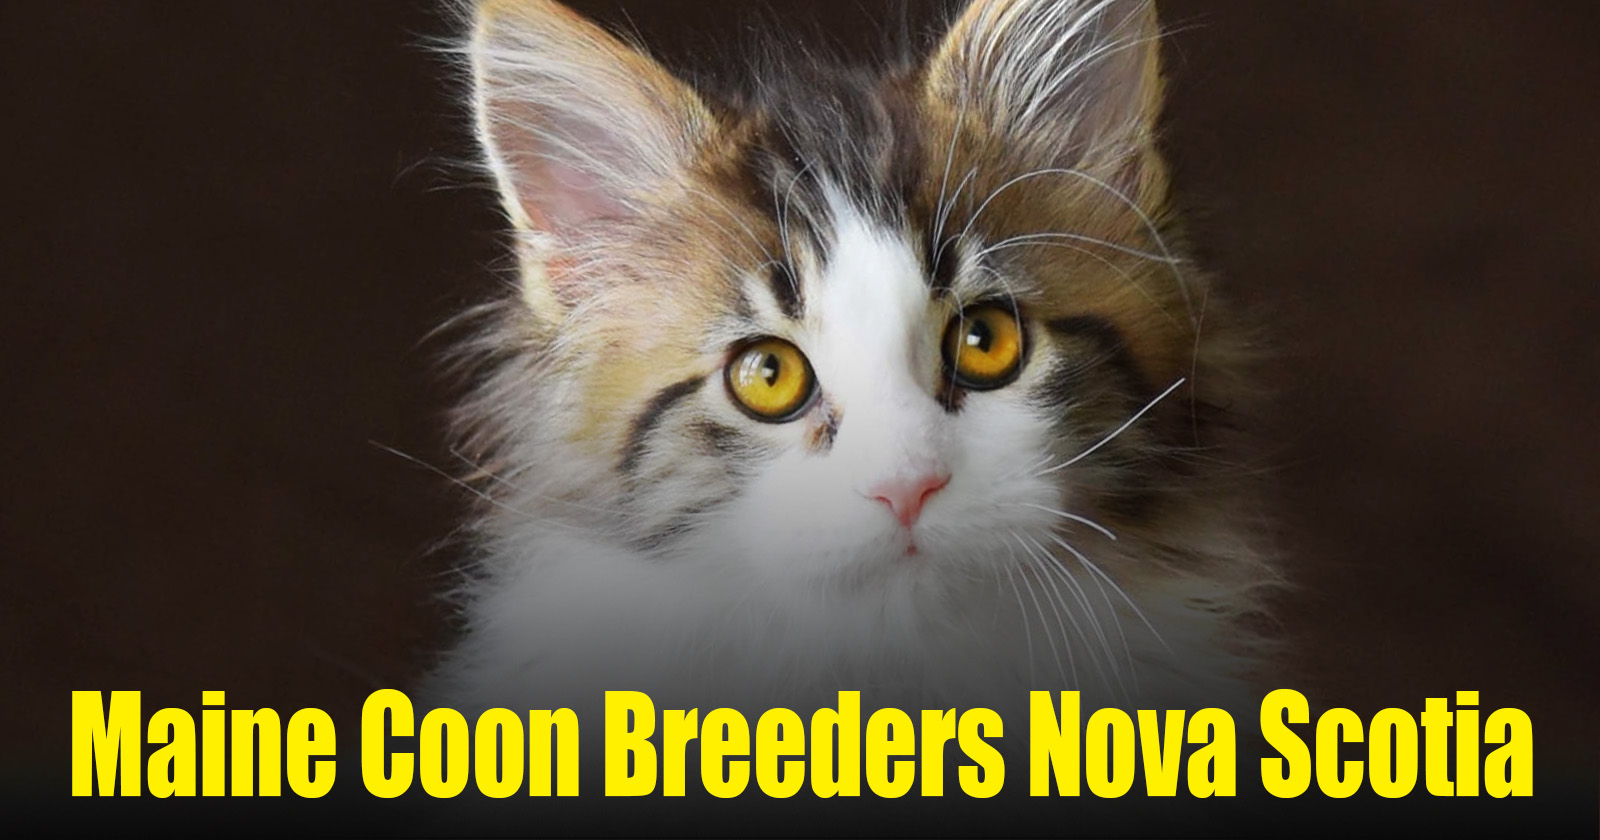 Maine Coon Breeders Nova Scotia | Kittens & Cats for Sale